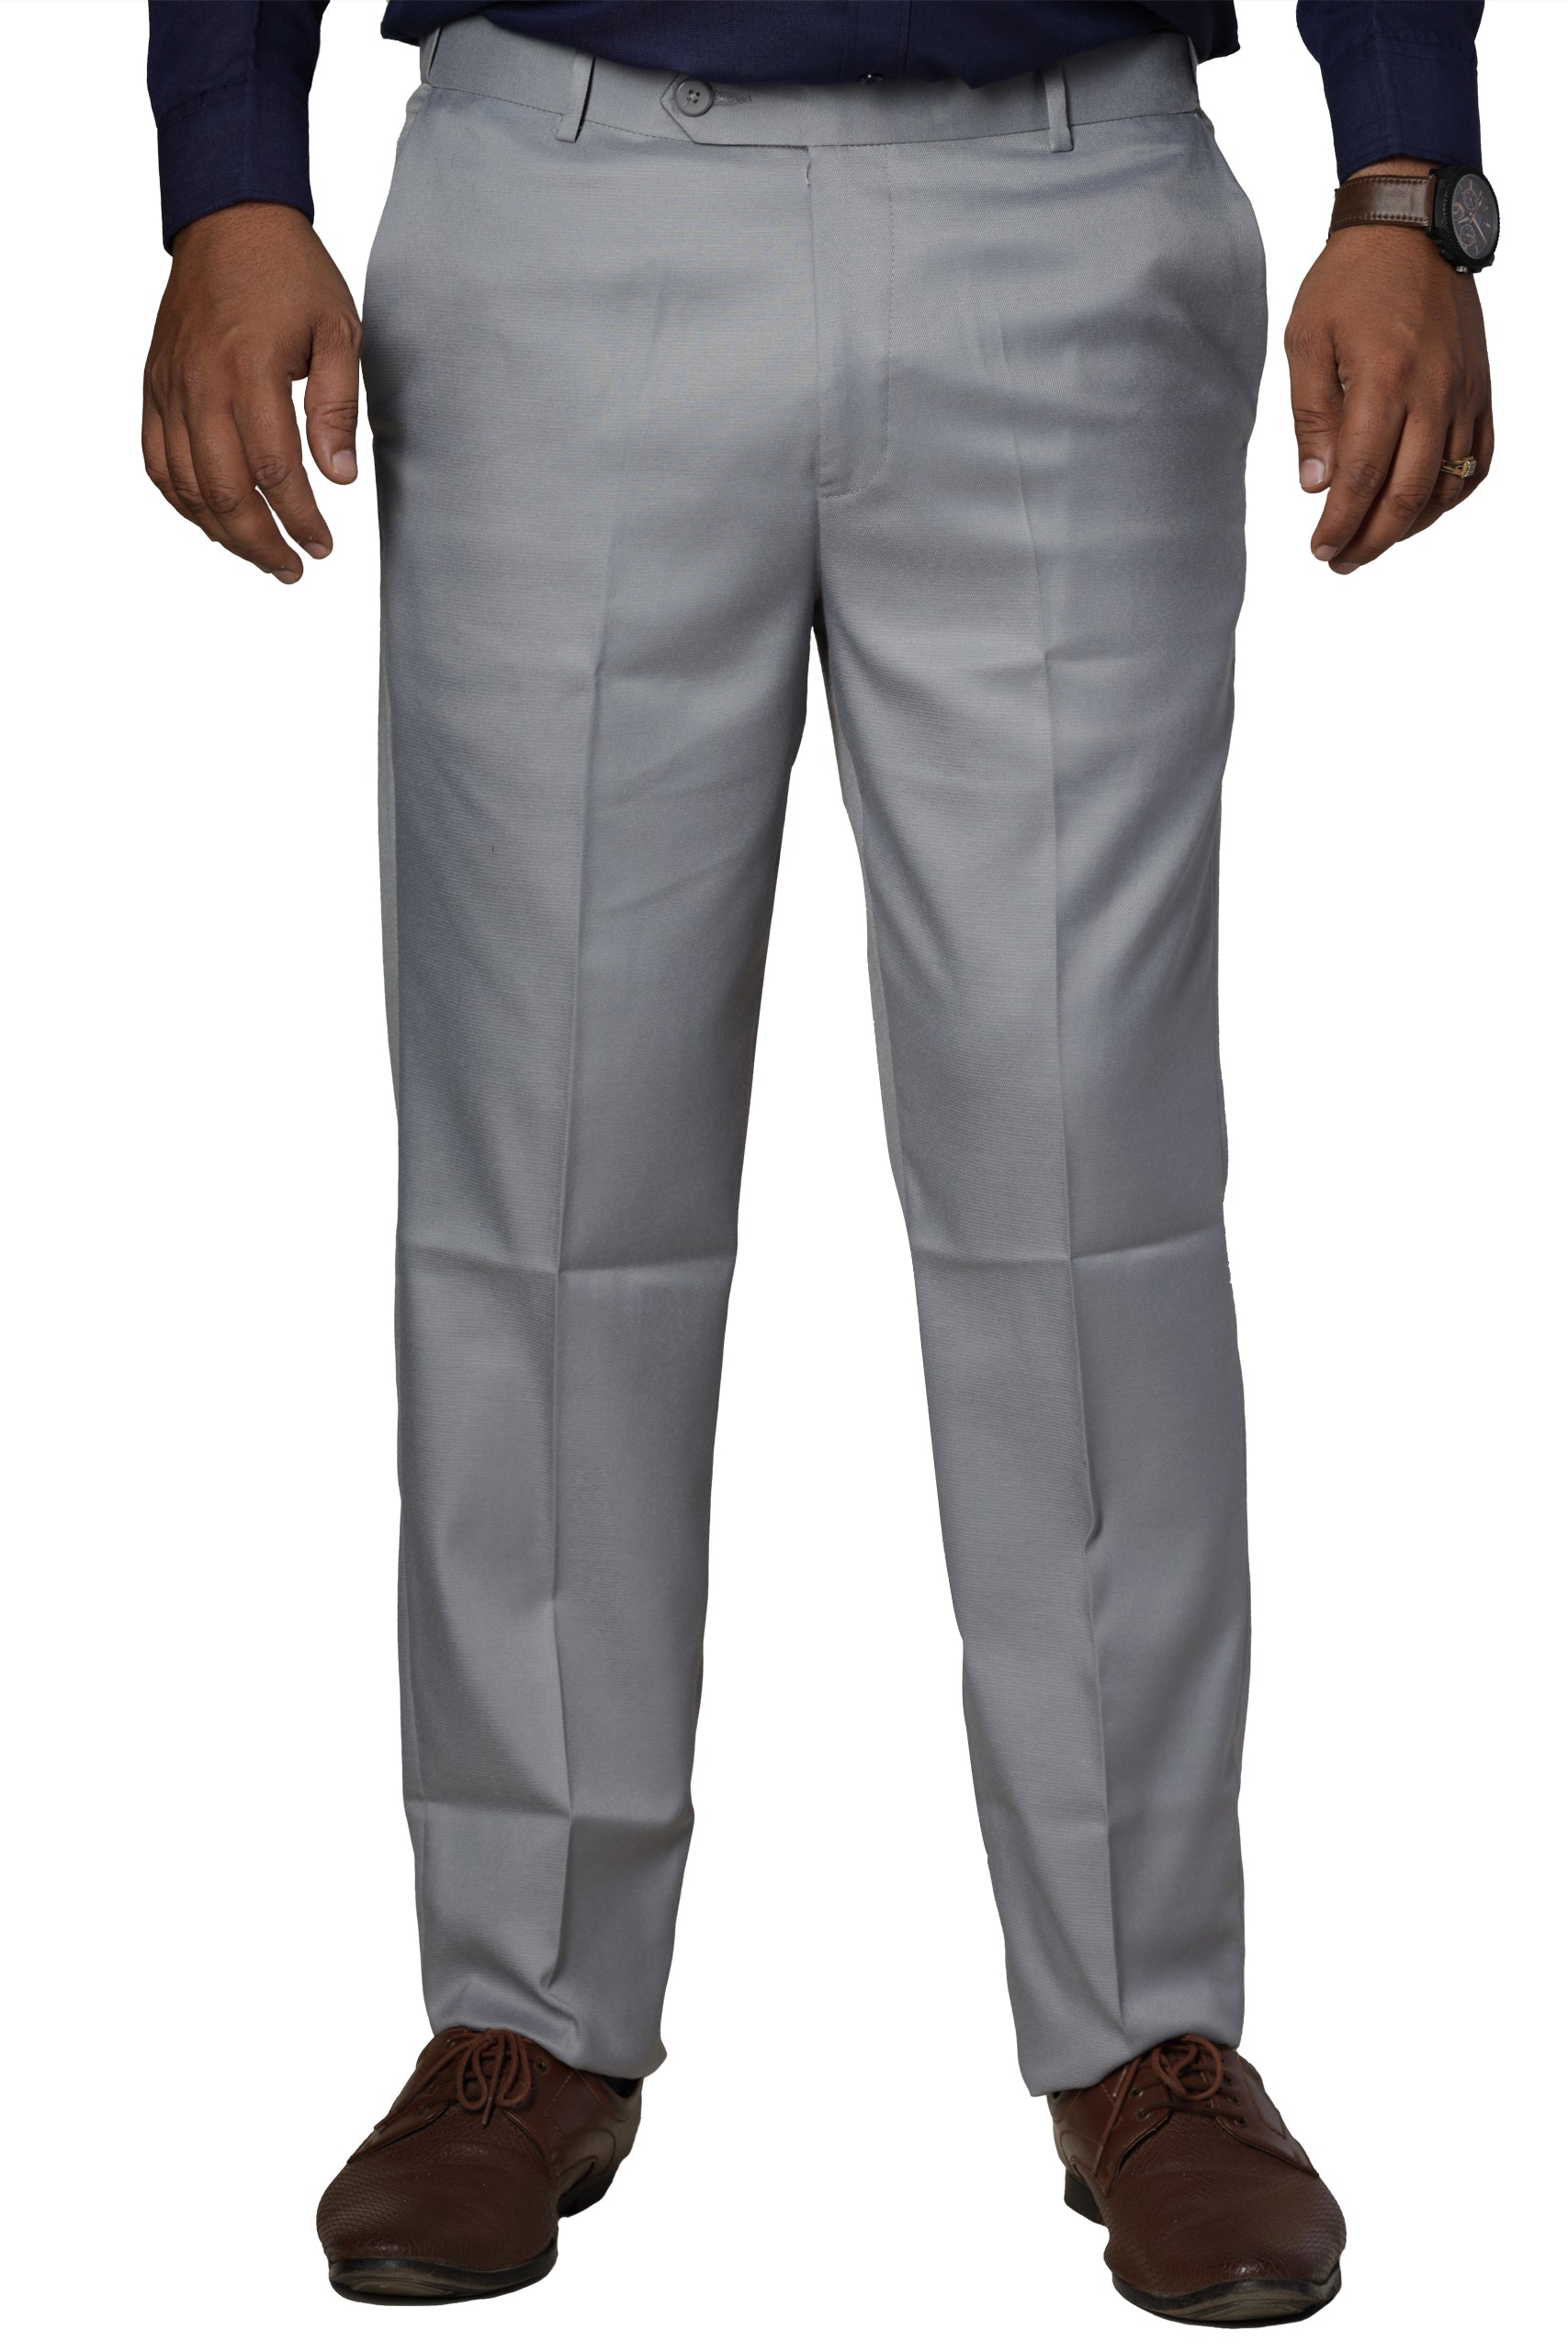 Flexiplus Straight Fit Pants Special edition